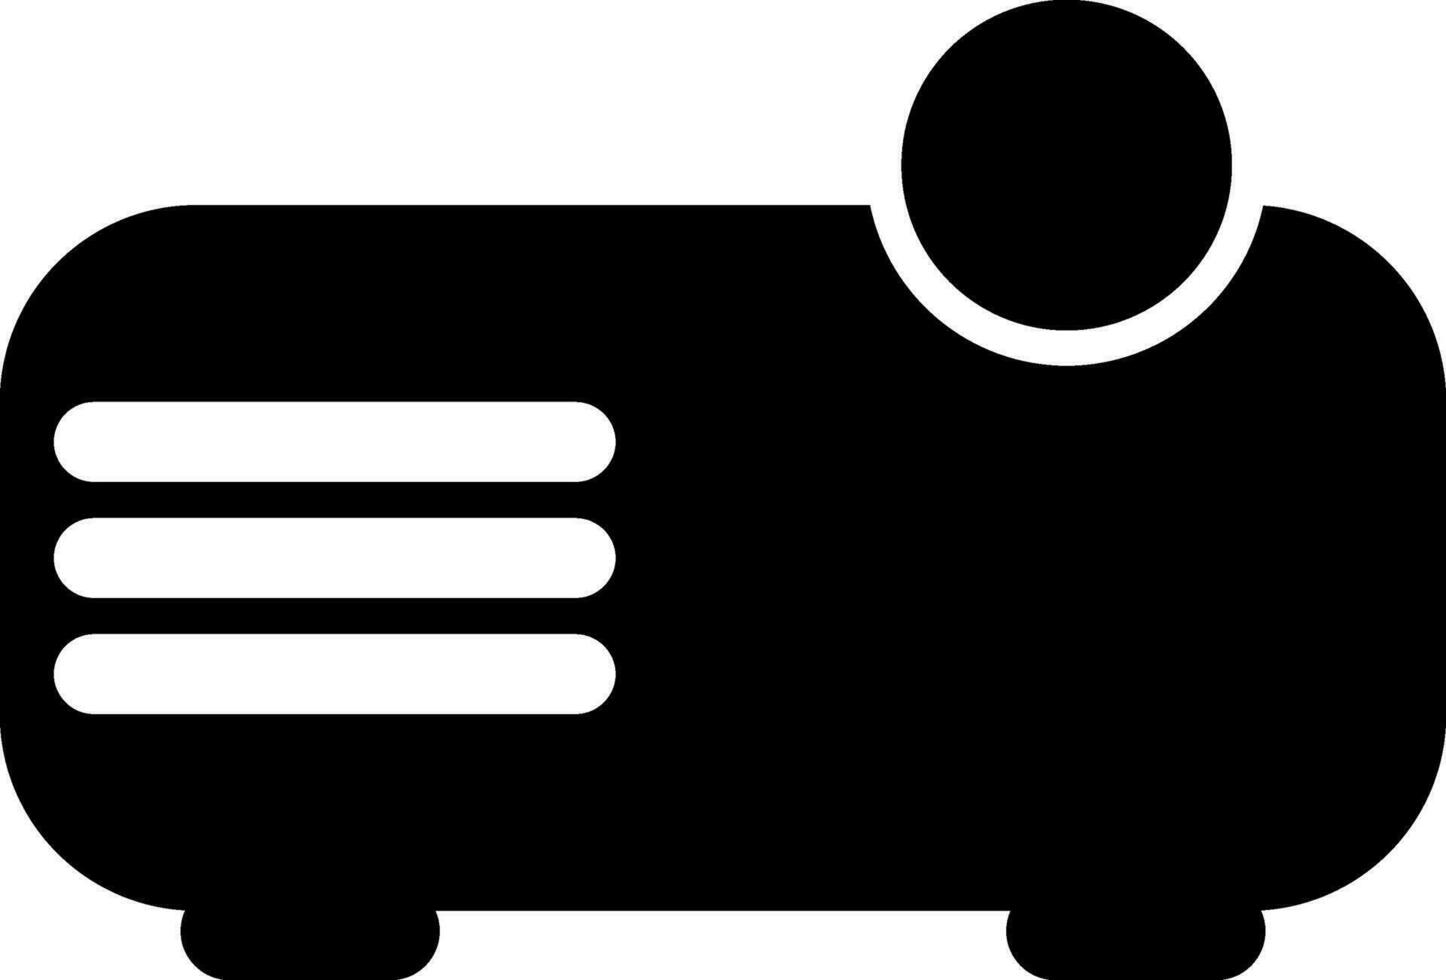 Isolated Black and White icon of Projector. vector